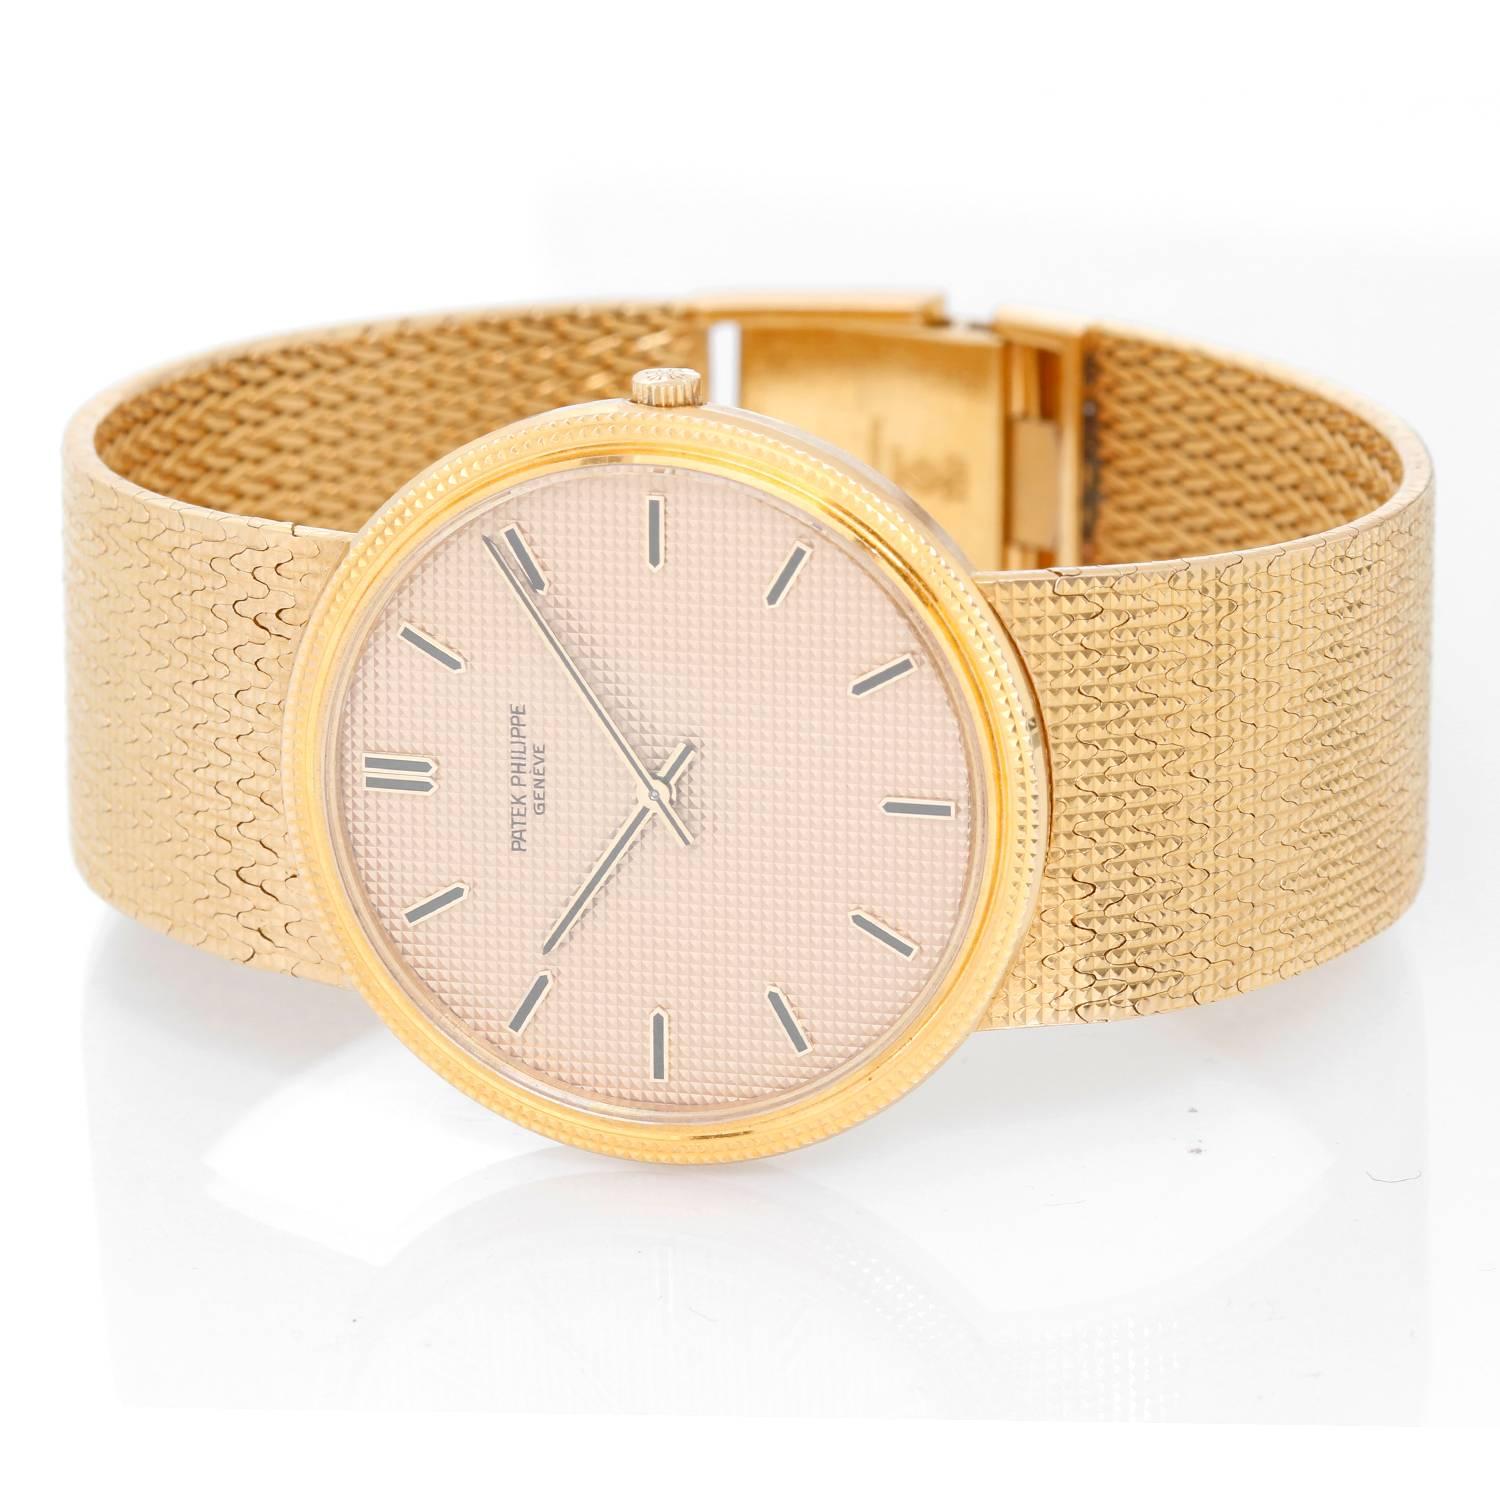 Patek Philippe & Co. 18K Yellow Gold Calatrava 3611 / 1 -  Manual. 18K Yellow Gold hobnail pattern bezel ( 33 mm). Gold textured dial with yellow gold hour markers. 19K Yellow Gold Patek Philippe bracelet. Pre-owned with custom box. 7 inch bracelet